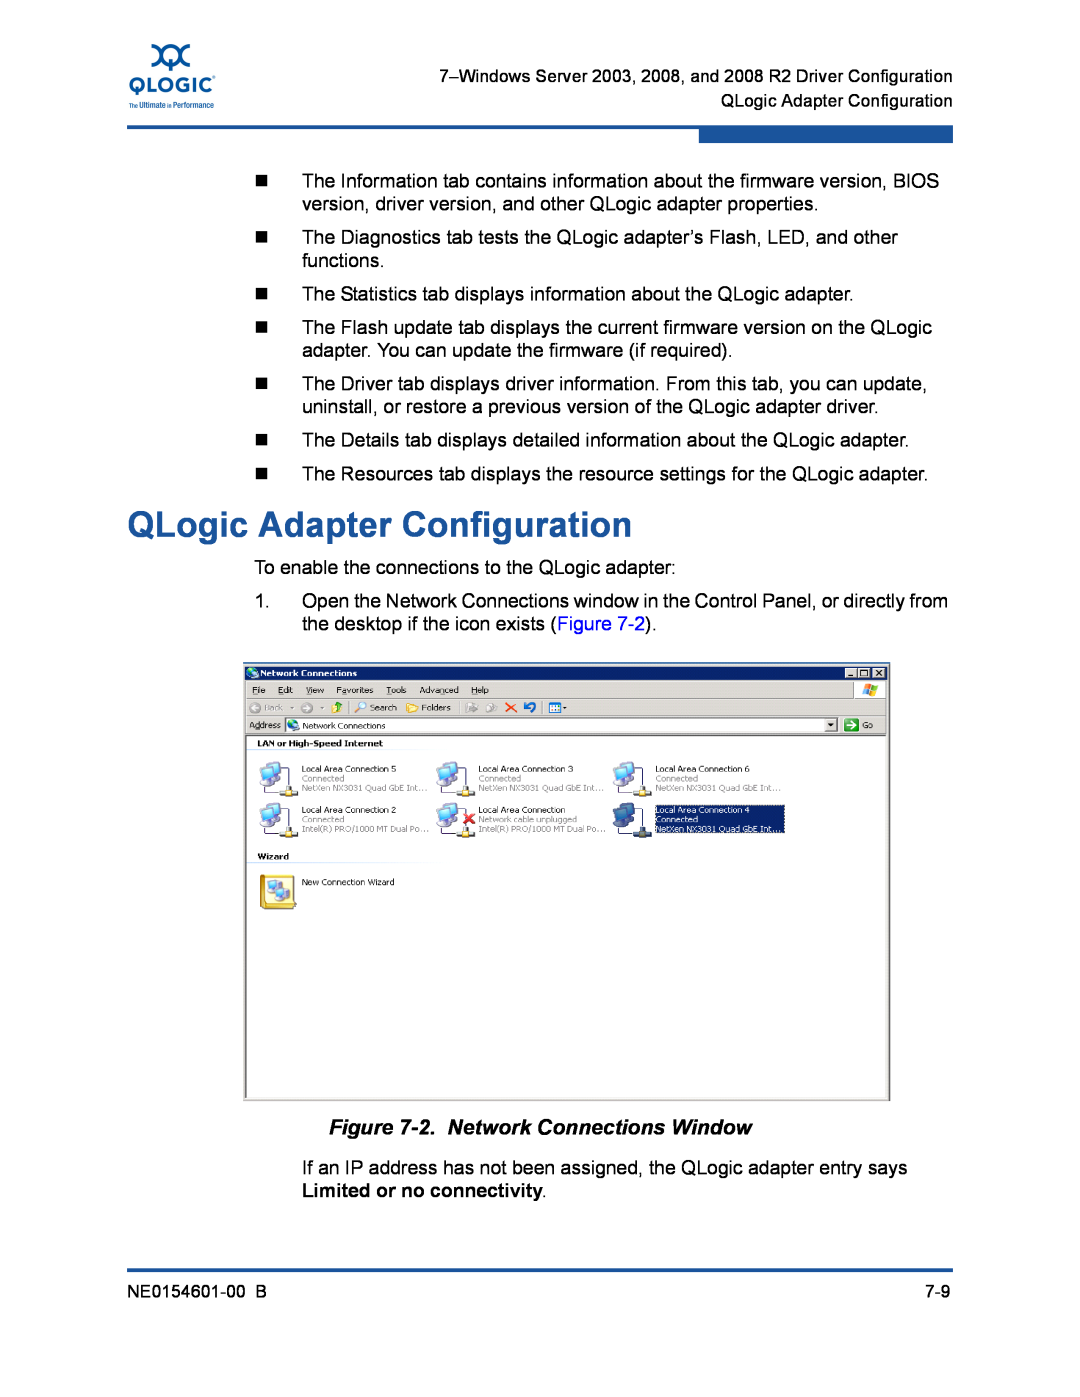 Q-Logic 3000, 3100 manual QLogic Adapter Configuration, 2. Network Connections Window 